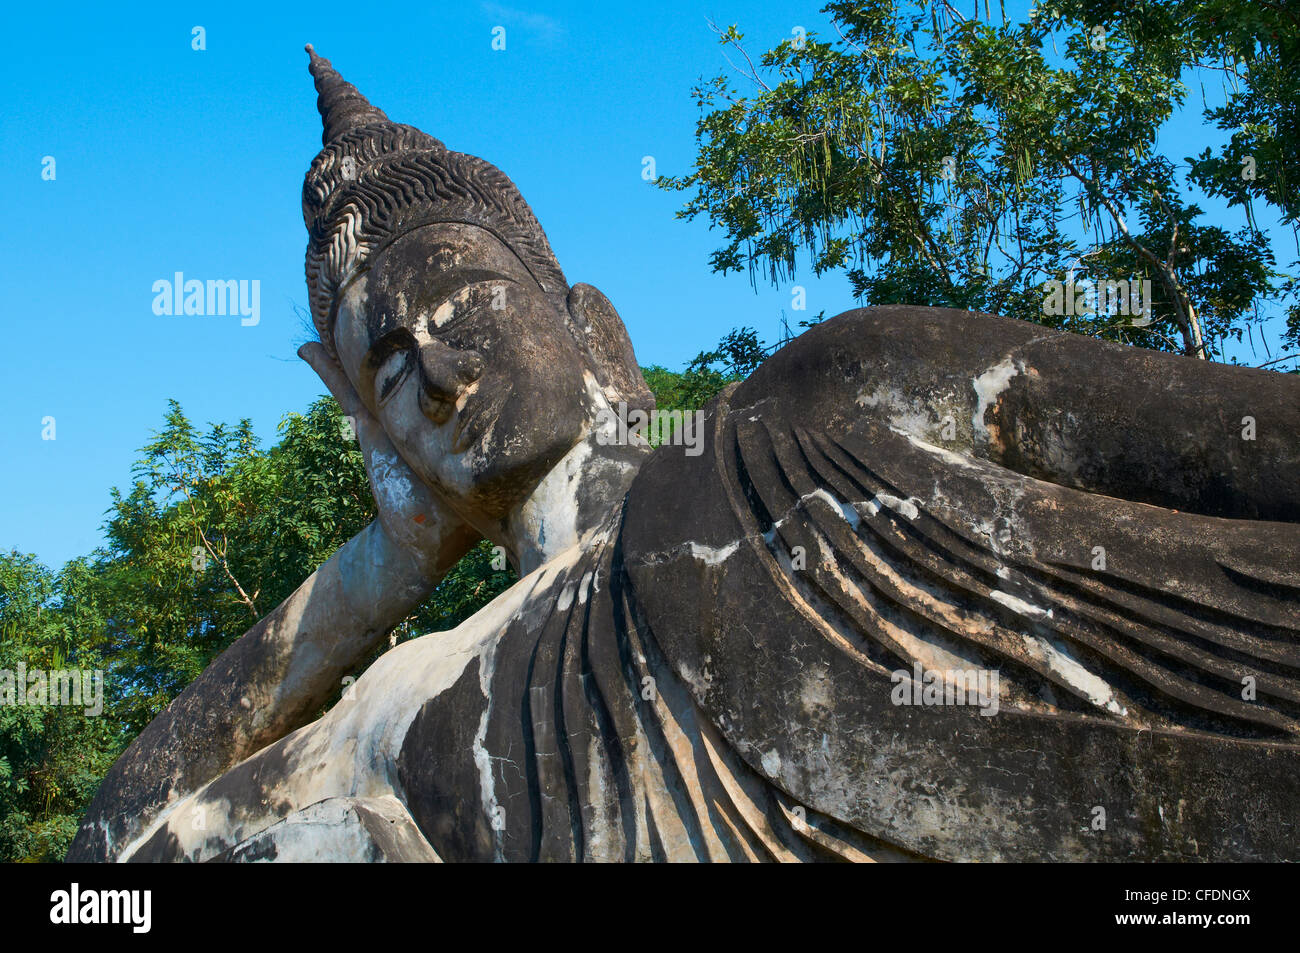 Statue of Buddha in Xieng Khuan Buddha Park, Vientiane Province, Laos, Indochina, Southeast Asia, Asia Stock Photo